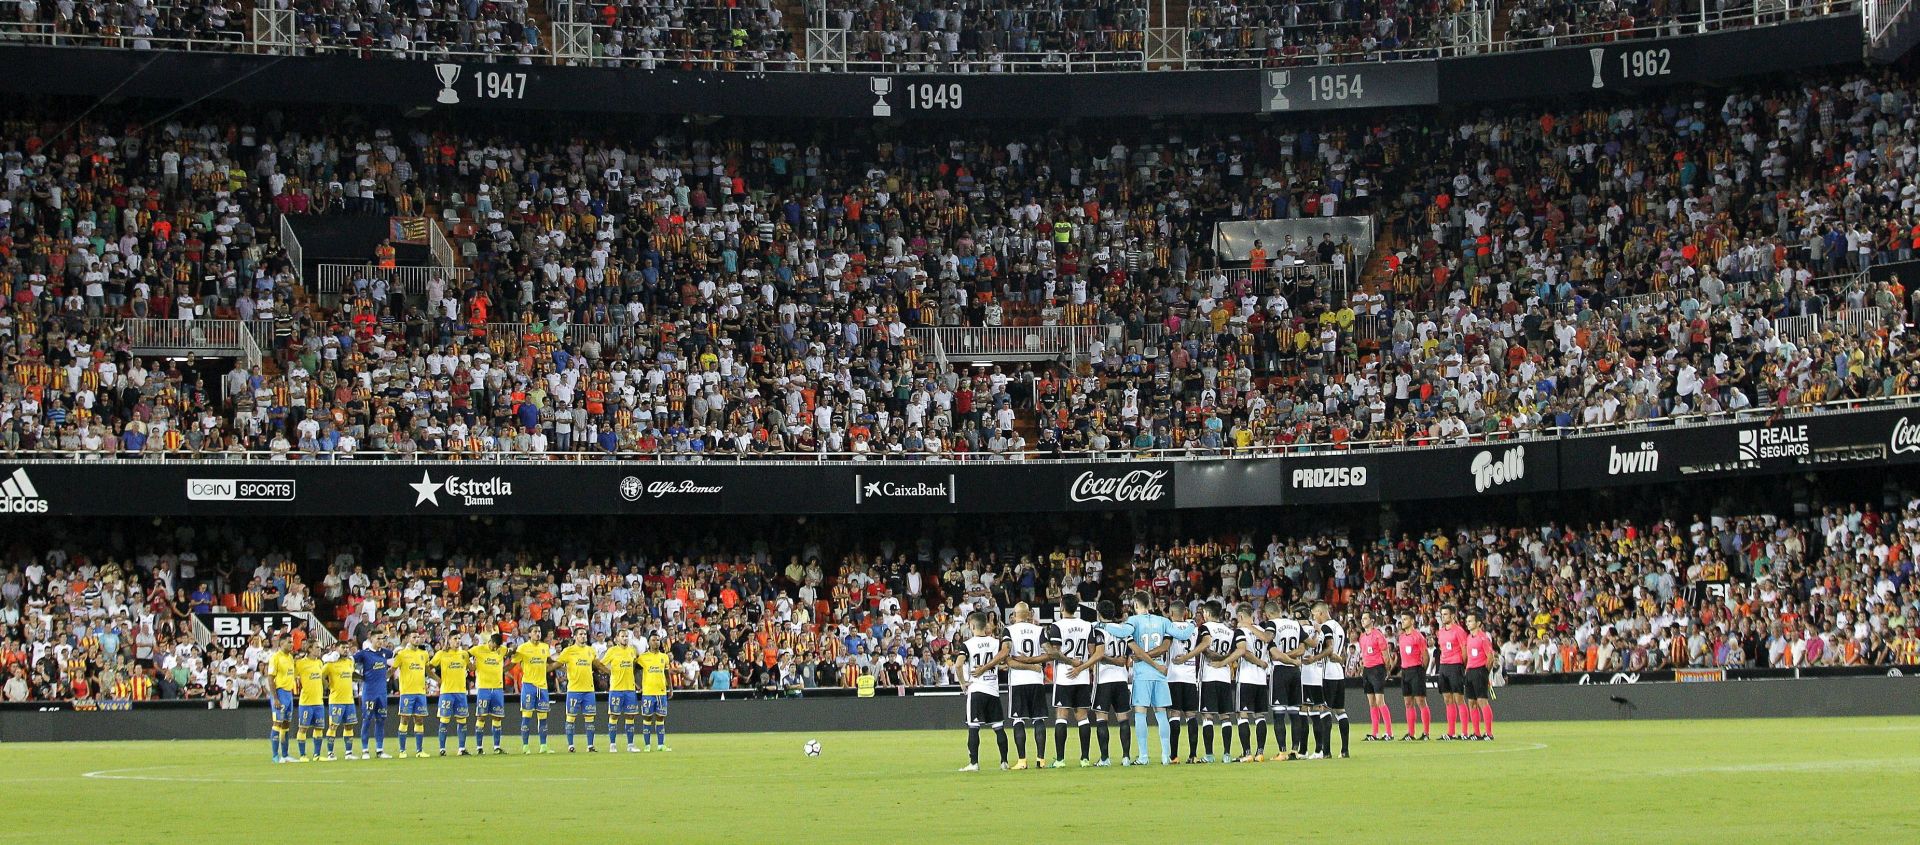 epa06150568 Valencia CF (R) and UD Las Palmas (L) players observe a minute's silence to pay tribute to victims of the terrorist attacks in Barcelona and Cambrils, before the Spanish Liga Primera Division soccer match played at Mestalla stadium, in Valencia, eastern Spain, 18 August 2017.  EPA/MANUEL BRUQUE